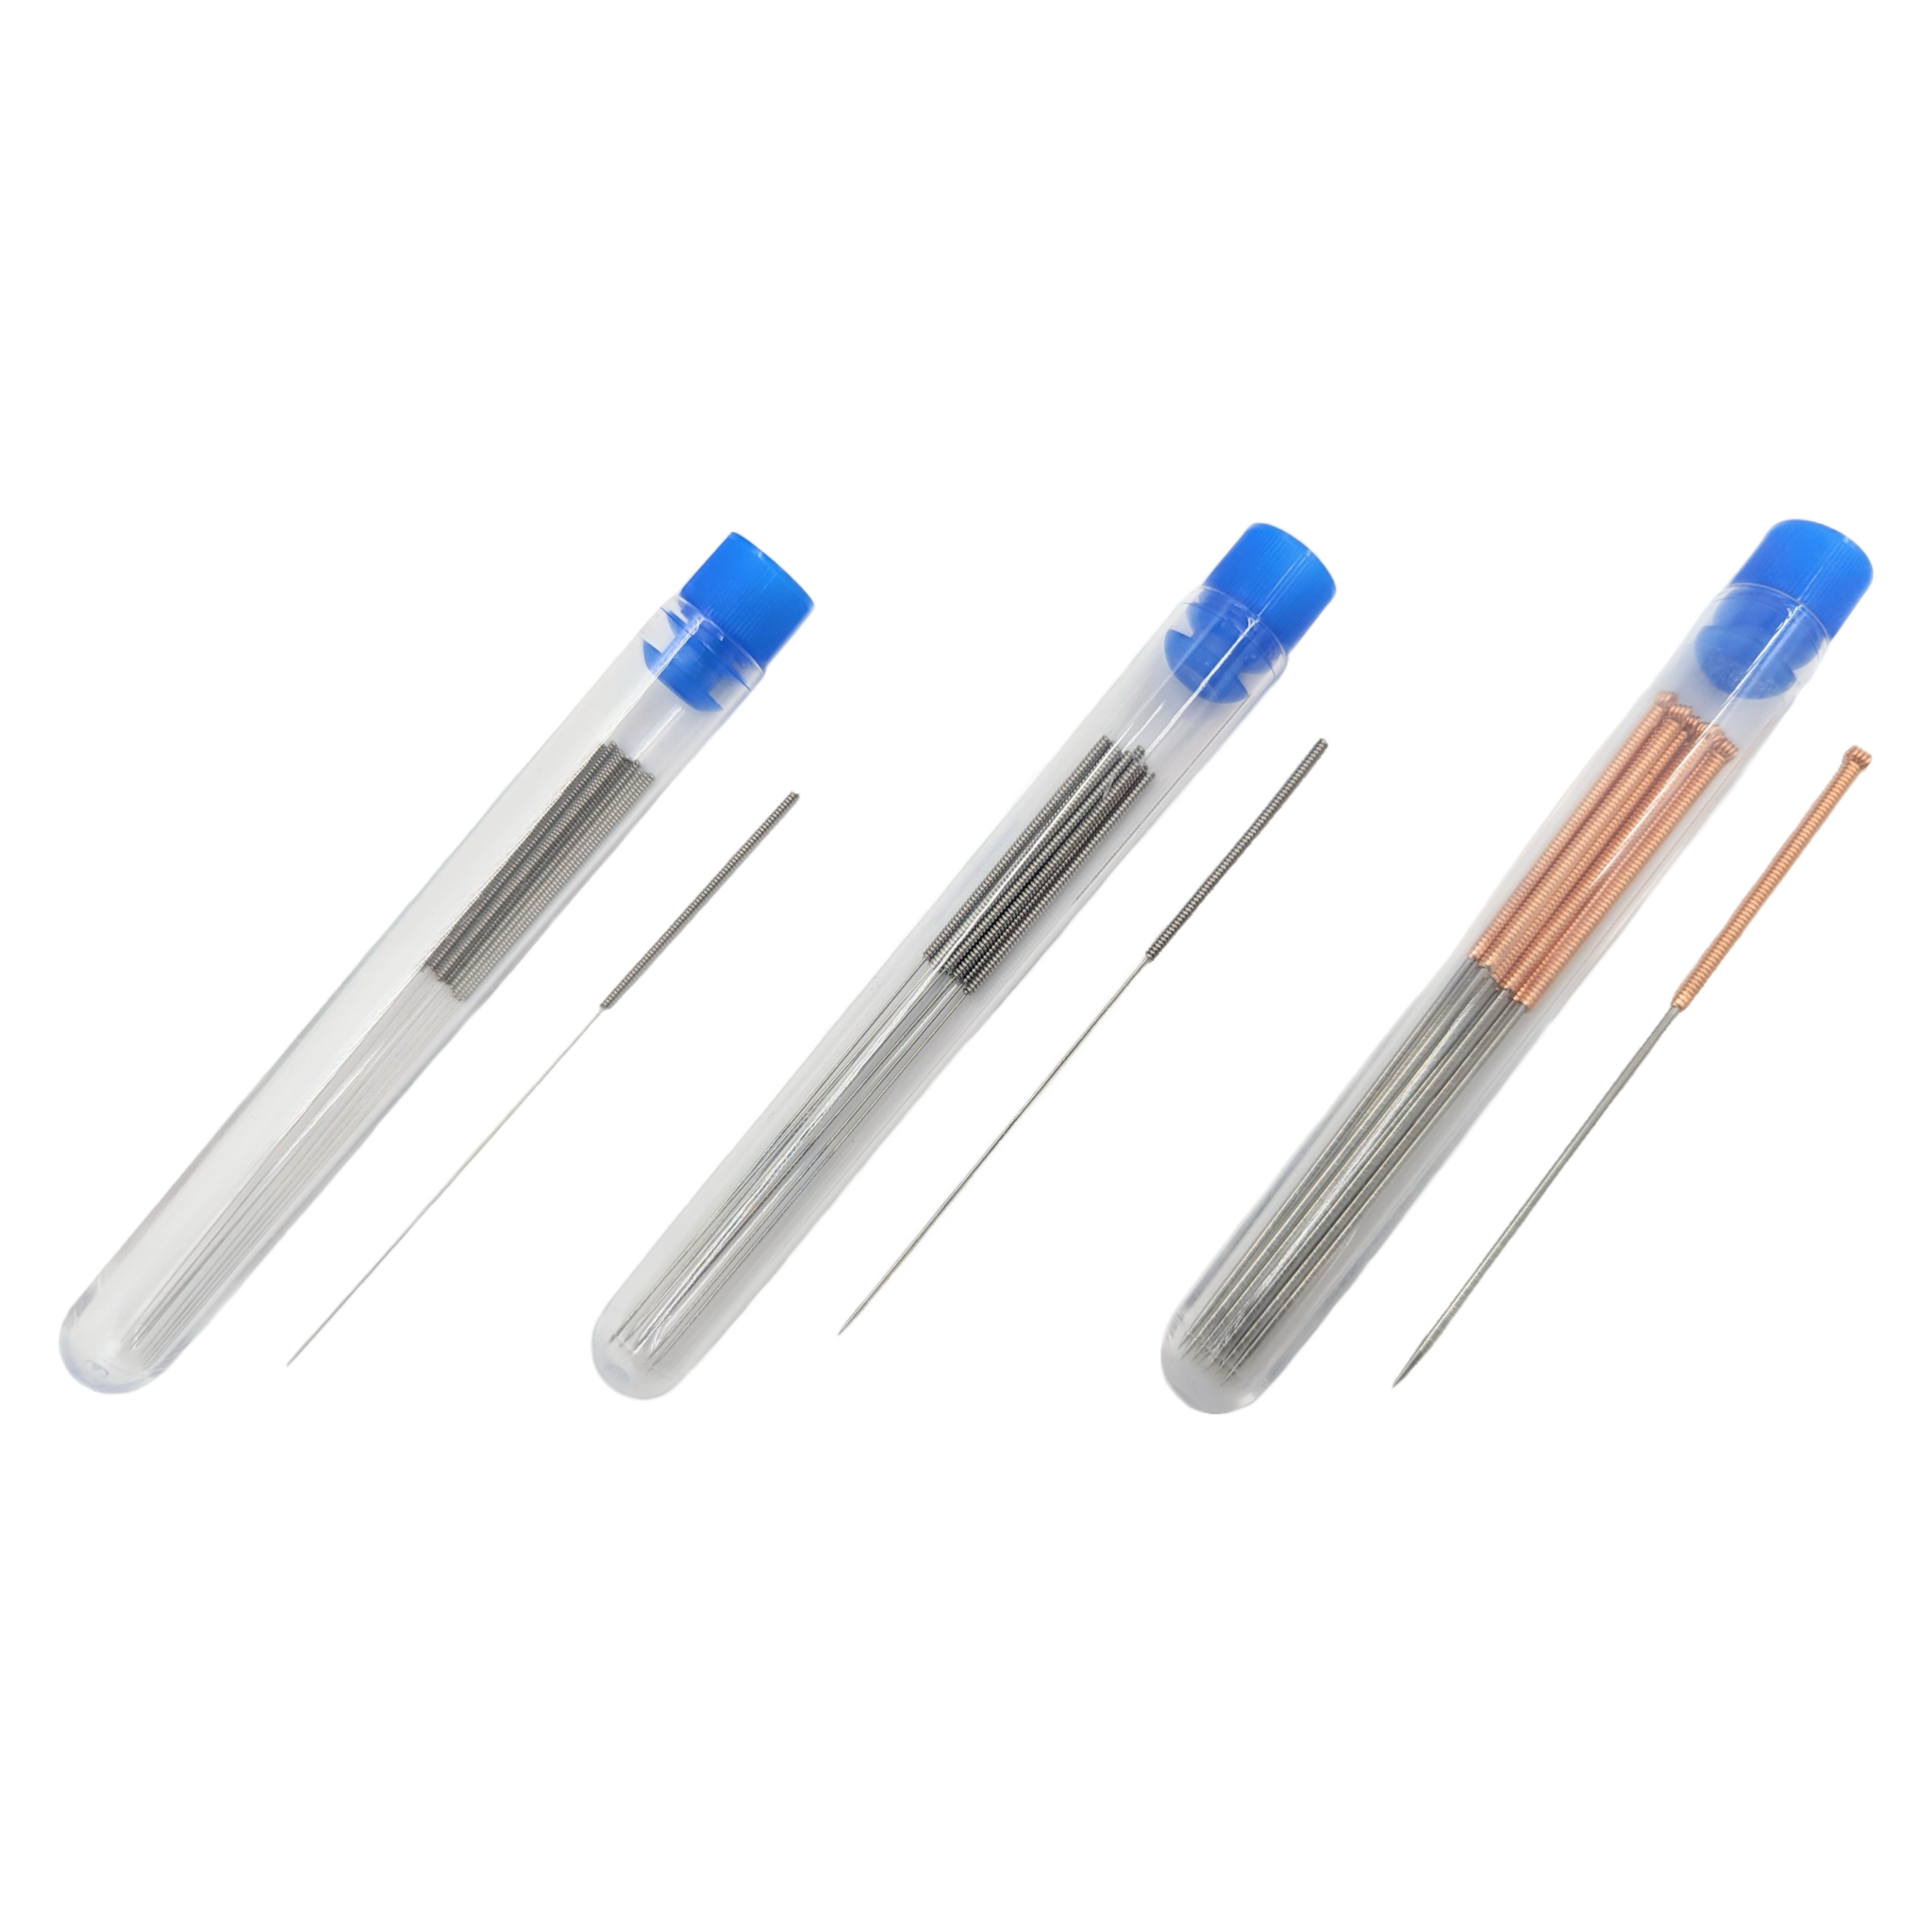 Nozzle Cleaning Needles